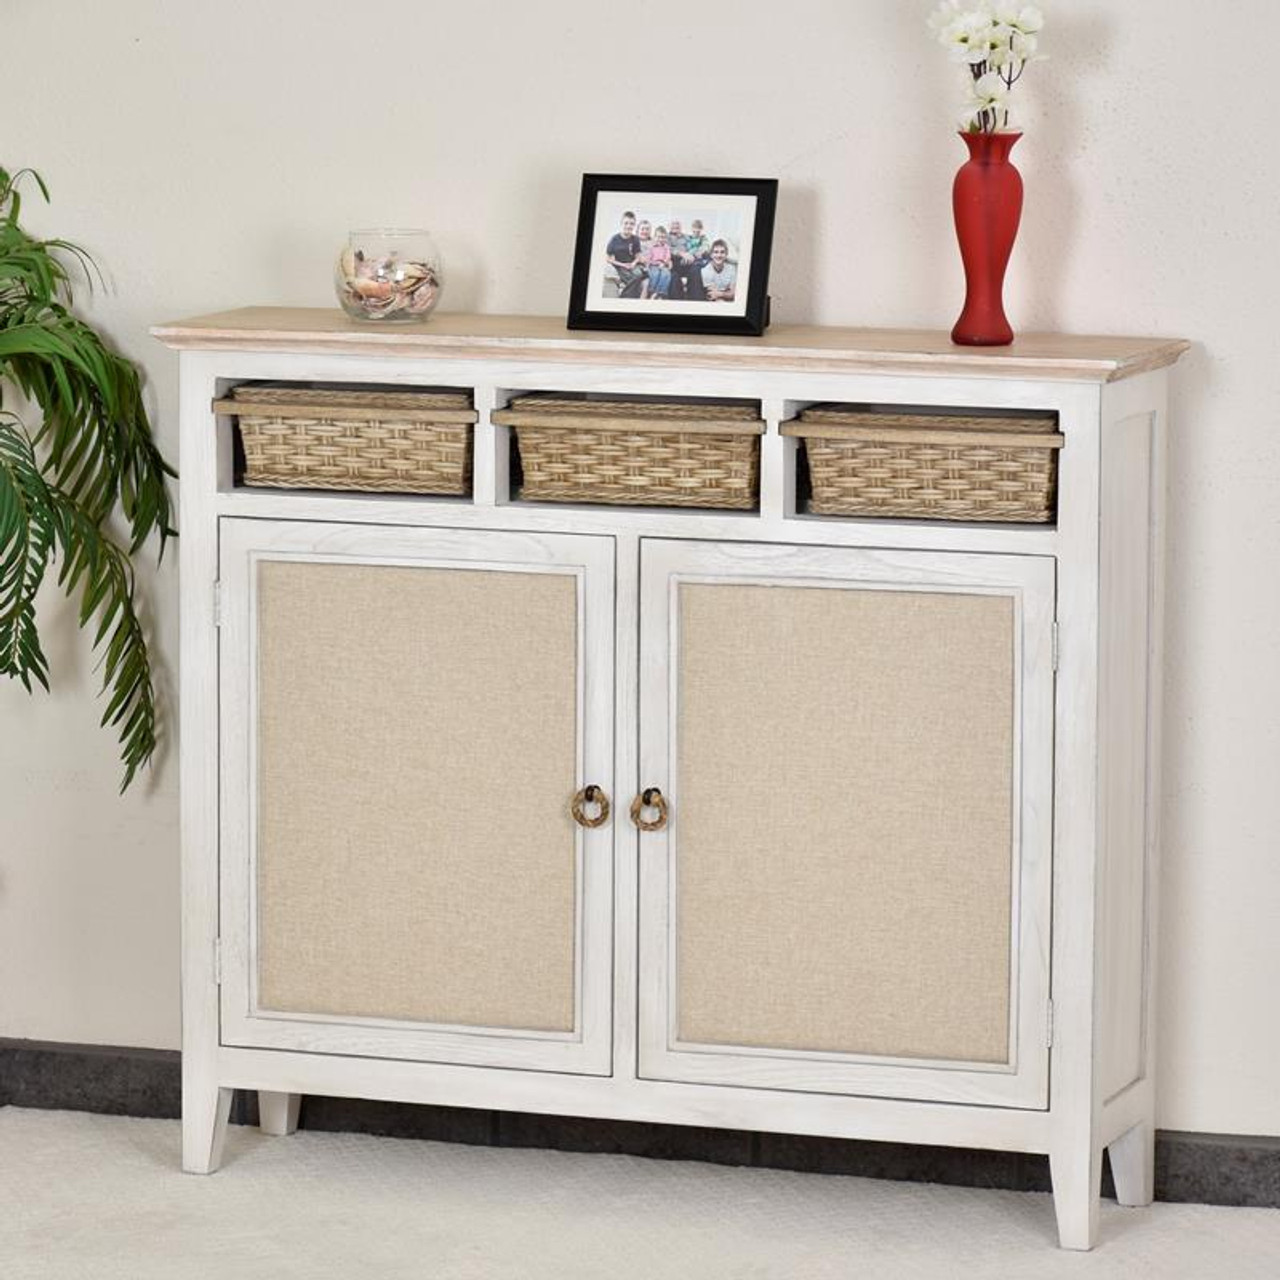 https://cdn11.bigcommerce.com/s-88gpz4/images/stencil/1280x1280/products/4043/18419/Captiva-Island-casual-distressed-entry-cabinet-with-baskets-and-fabric-staged__65090.1684872230.jpg?c=2&imbypass=on